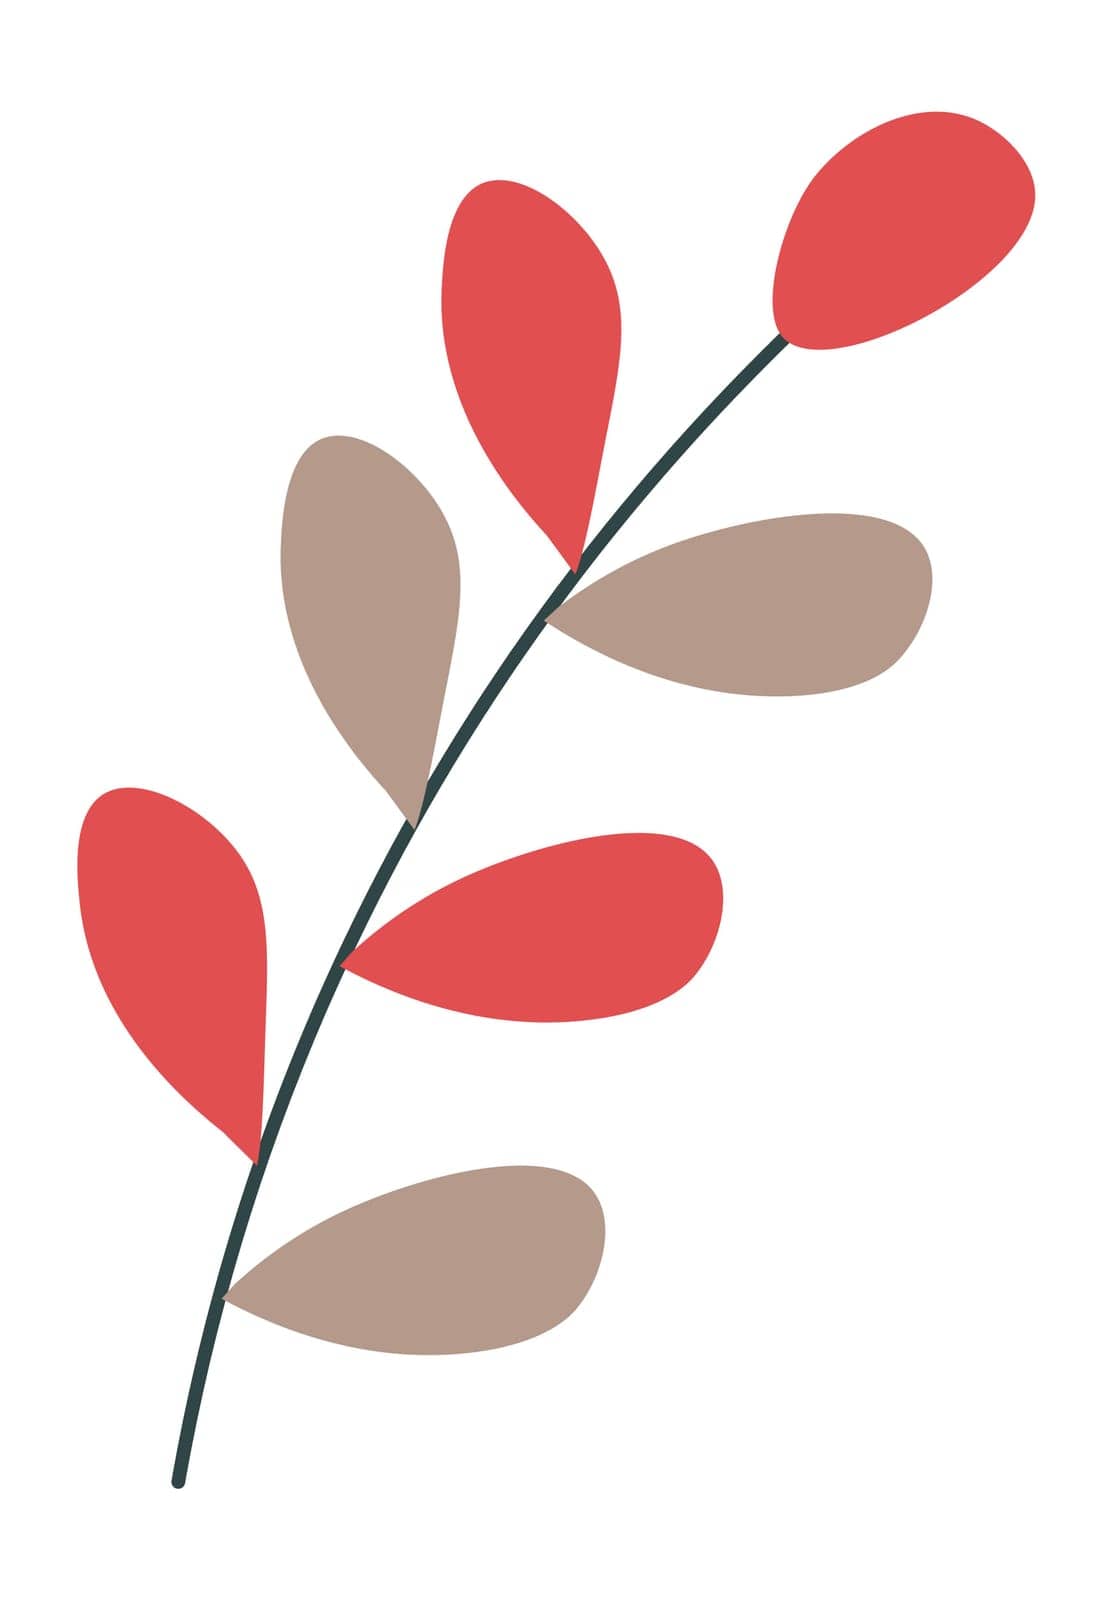 Floral composition with autumn forest branches and foliage, isolated woods twig with red and grey leaves. Environmental change, decorative botany, organic and natural sign. Vector in flat style